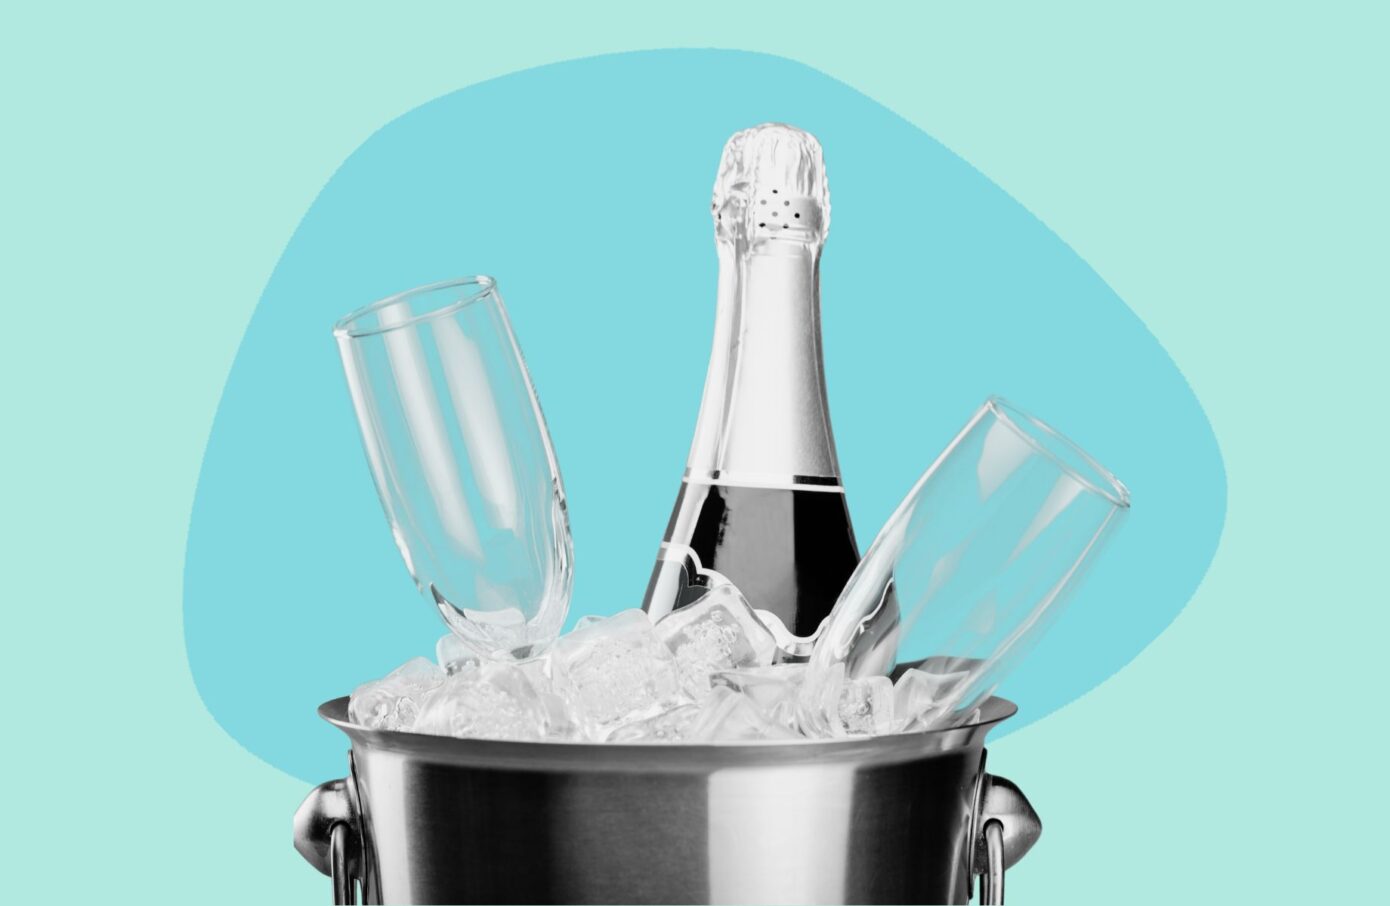 a bottle of champagne in an ice bucket